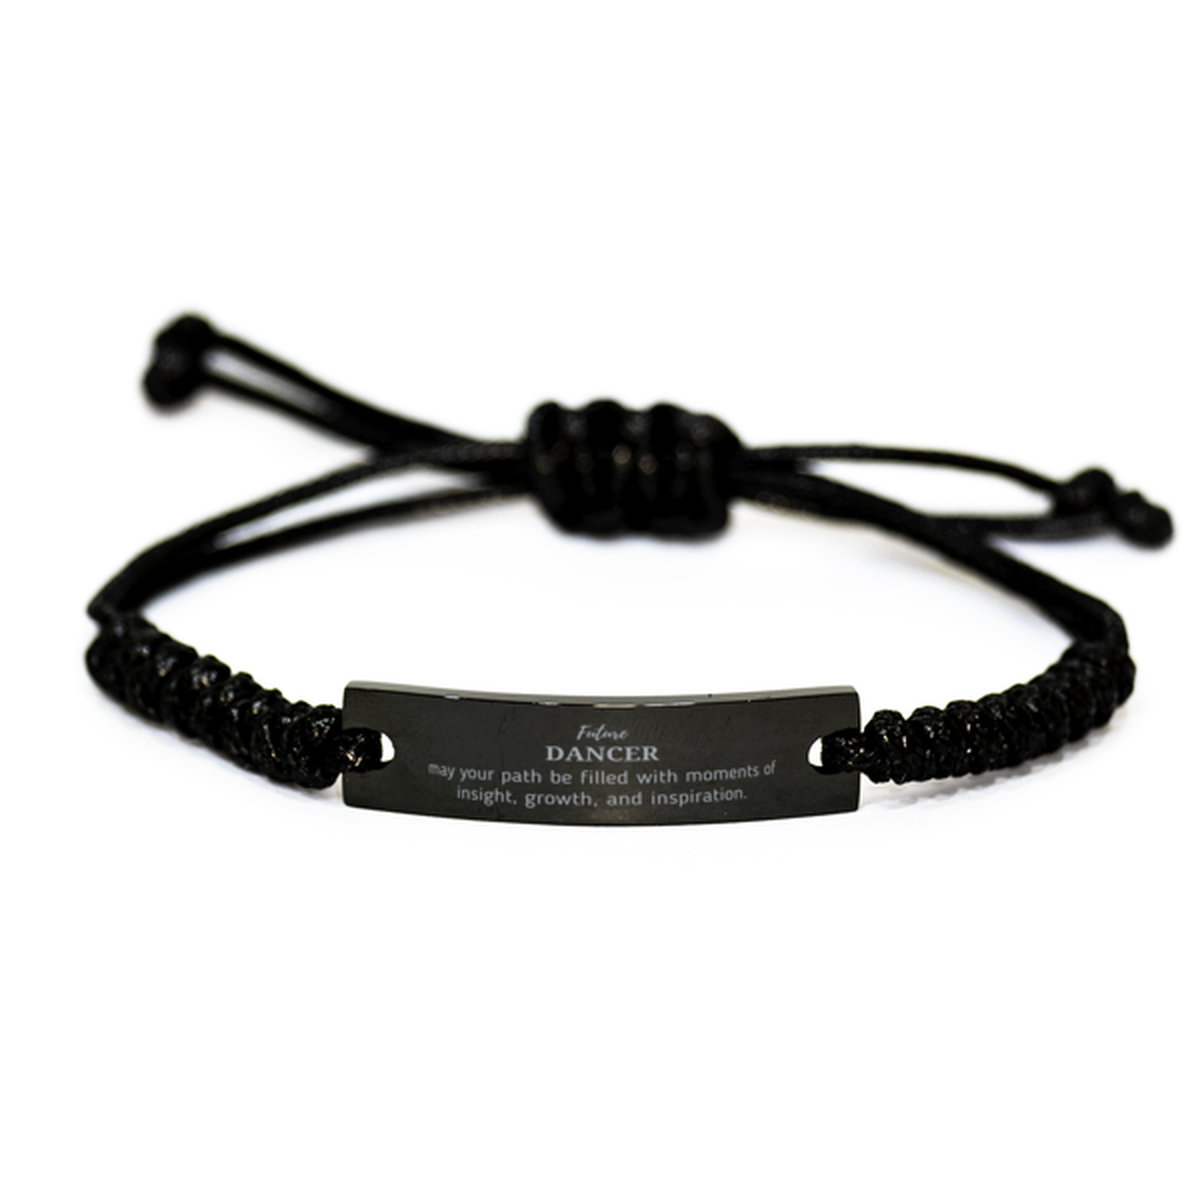 Future Dancer Gifts, May your path be filled with moments of insight, Graduation Gifts for New Dancer, Christmas Unique Black Rope Bracelet For Men, Women, Friends